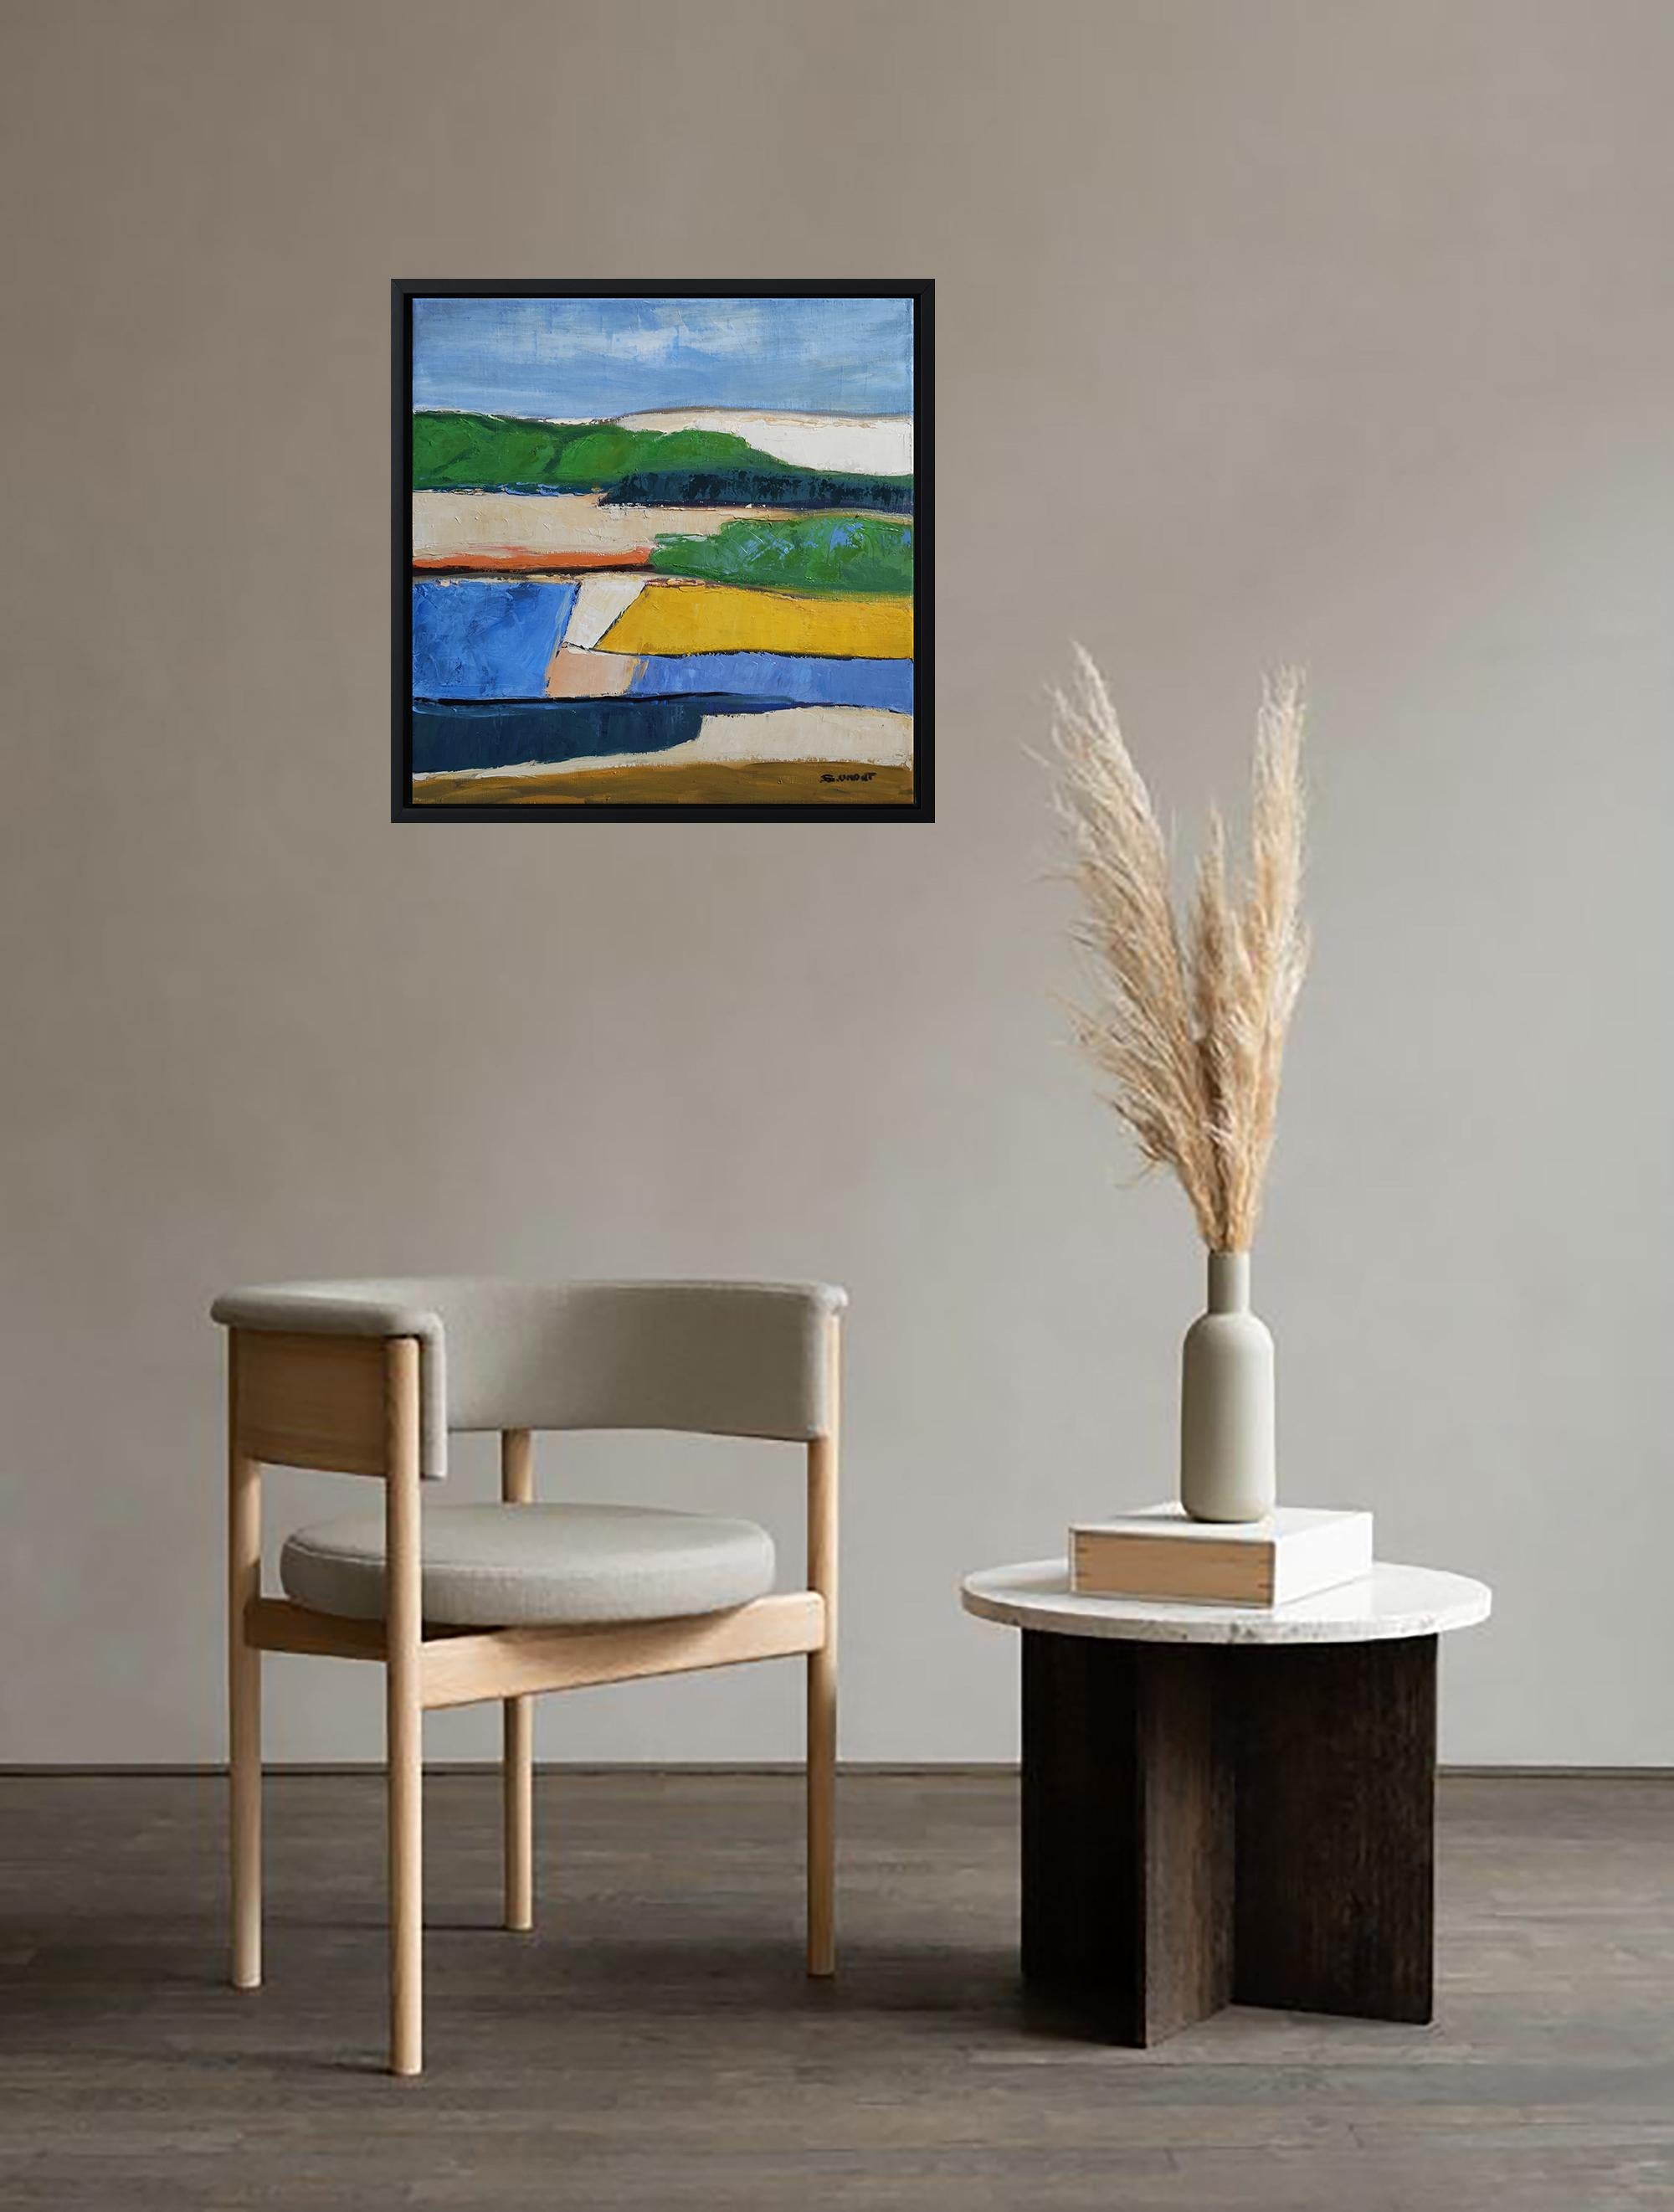 In this canvas, Sophie Dumont transports us to the heart of the Normandy countryside, where fields stretch under an infinite sky. With a palette of greens, whites, and blues, she captures the ever-changing brilliance of nature, a symphony of colors